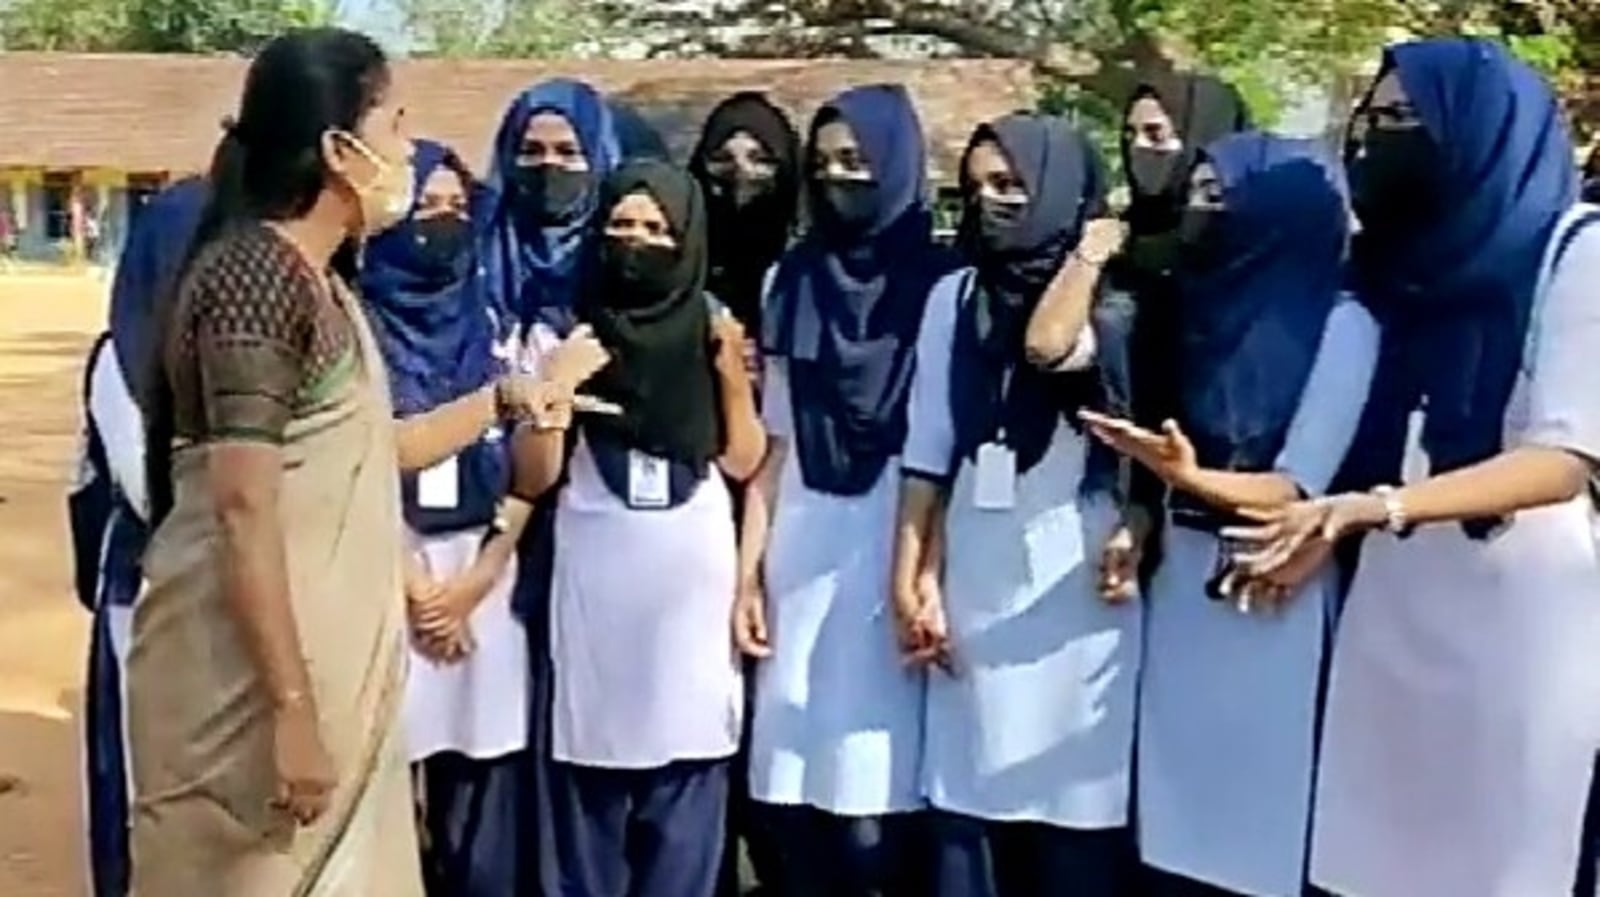 BREAKING- Hijab Ban: Student Moves Supreme Court Challenging Karnataka HCs Interim Order Disallowing Religious Dress In Colleges During Pendency Of Cases